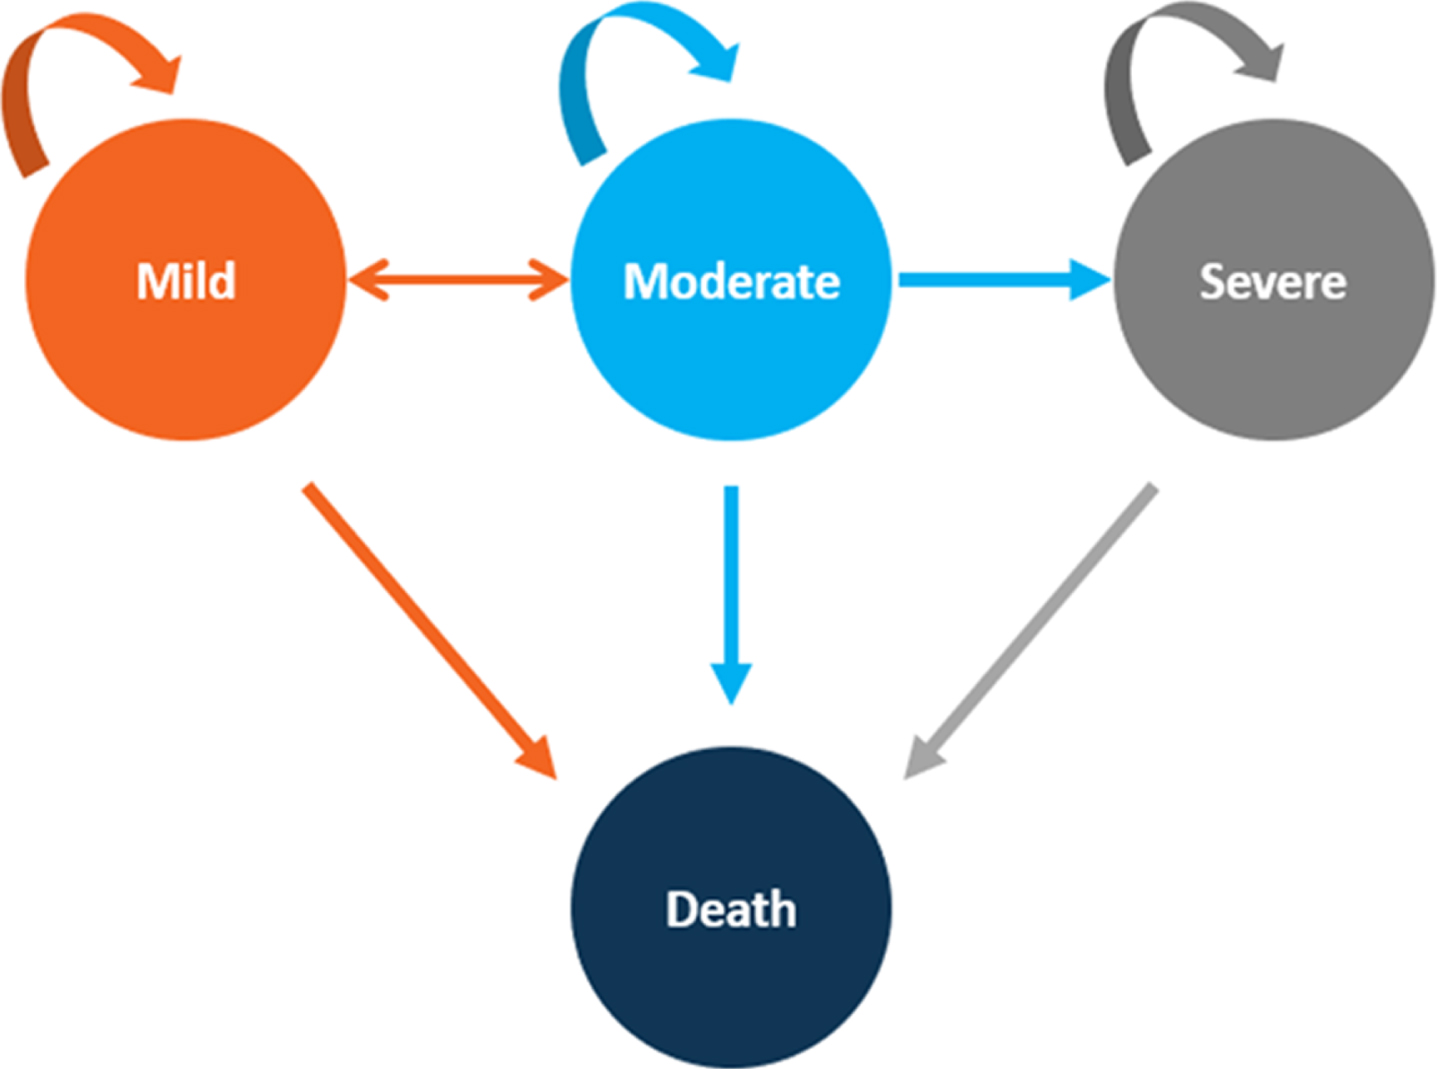 Health-State Transition Diagram. Depicts the Markov model health state transition. The circles represent health states, and the arrows represent possible transitions from one health state to another.